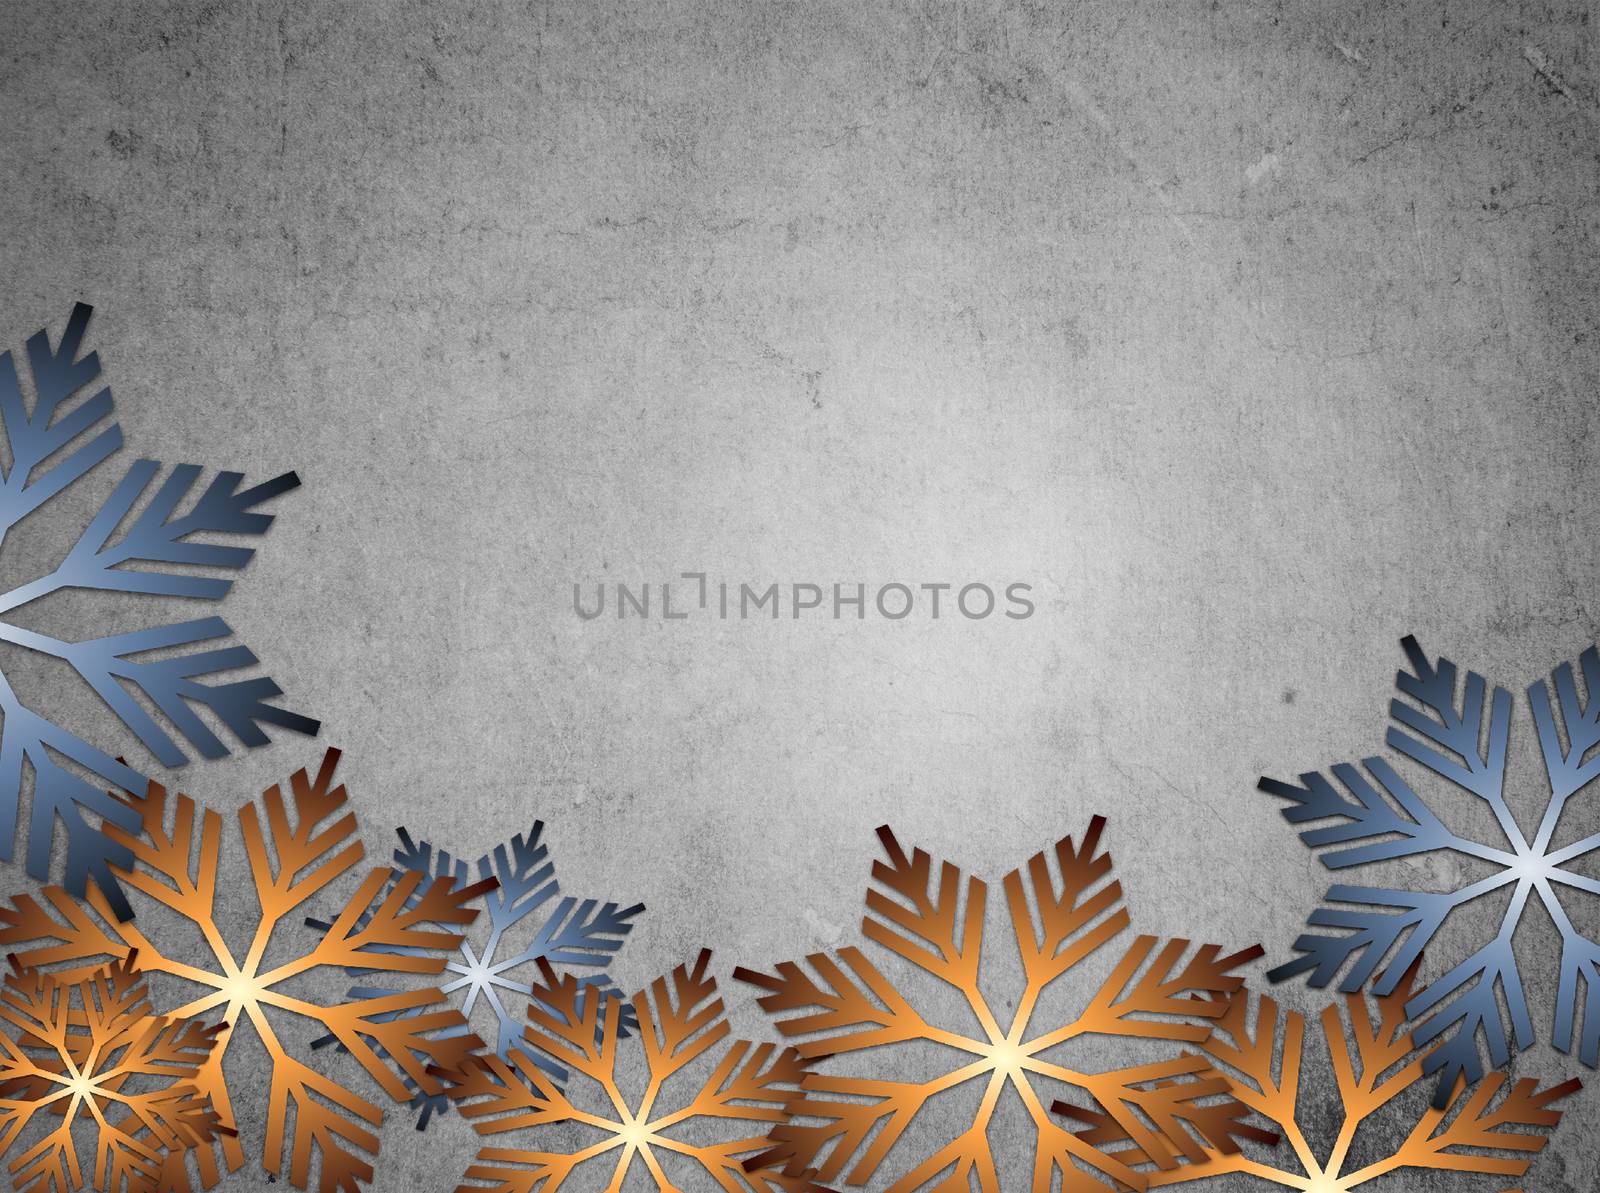 Christmas background with colorful snowflakes design, with space for text